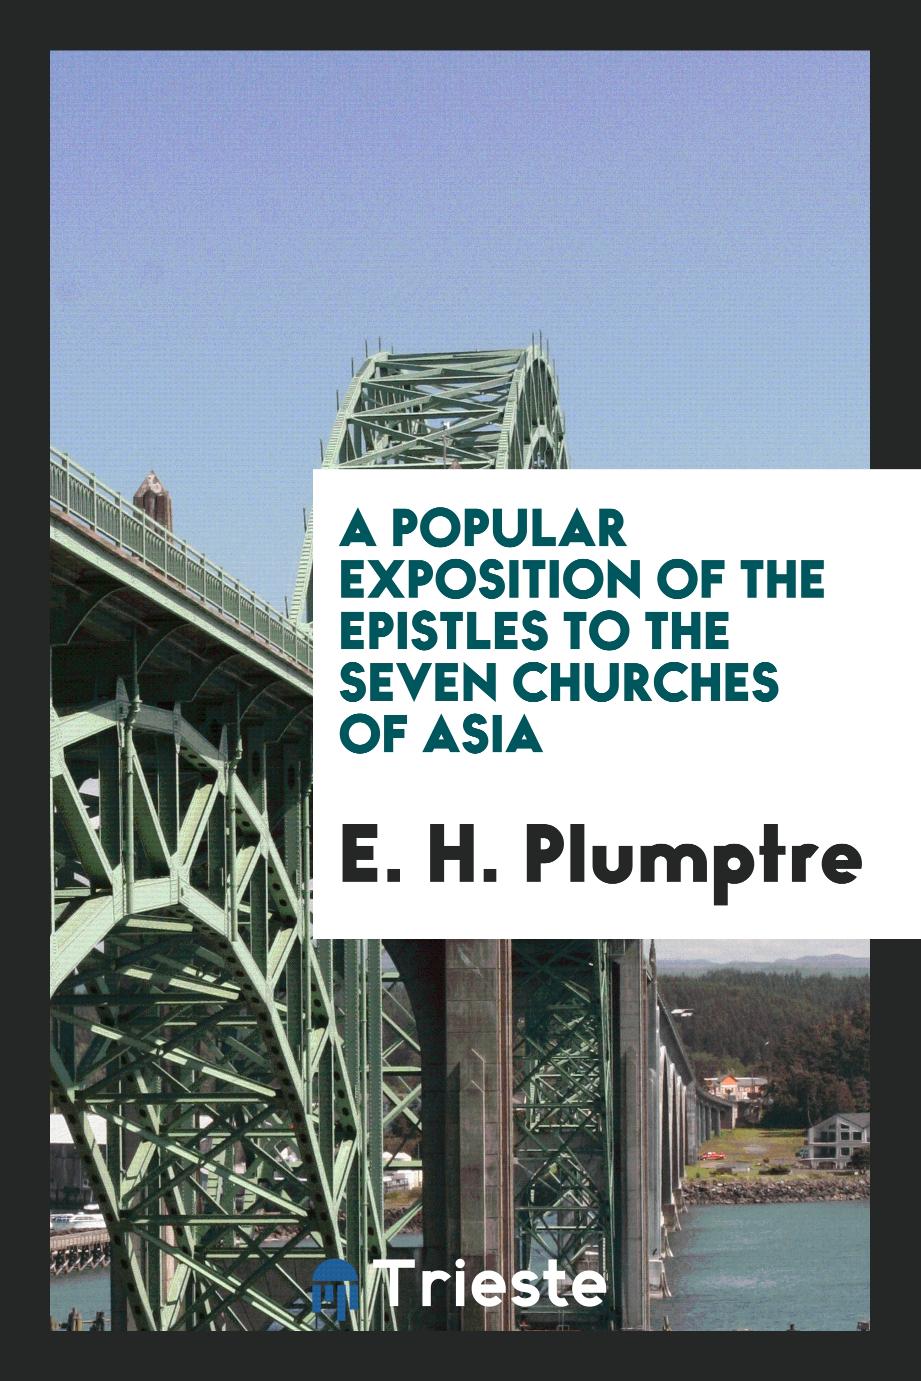 A Popular Exposition of the Epistles to the Seven Churches of Asia